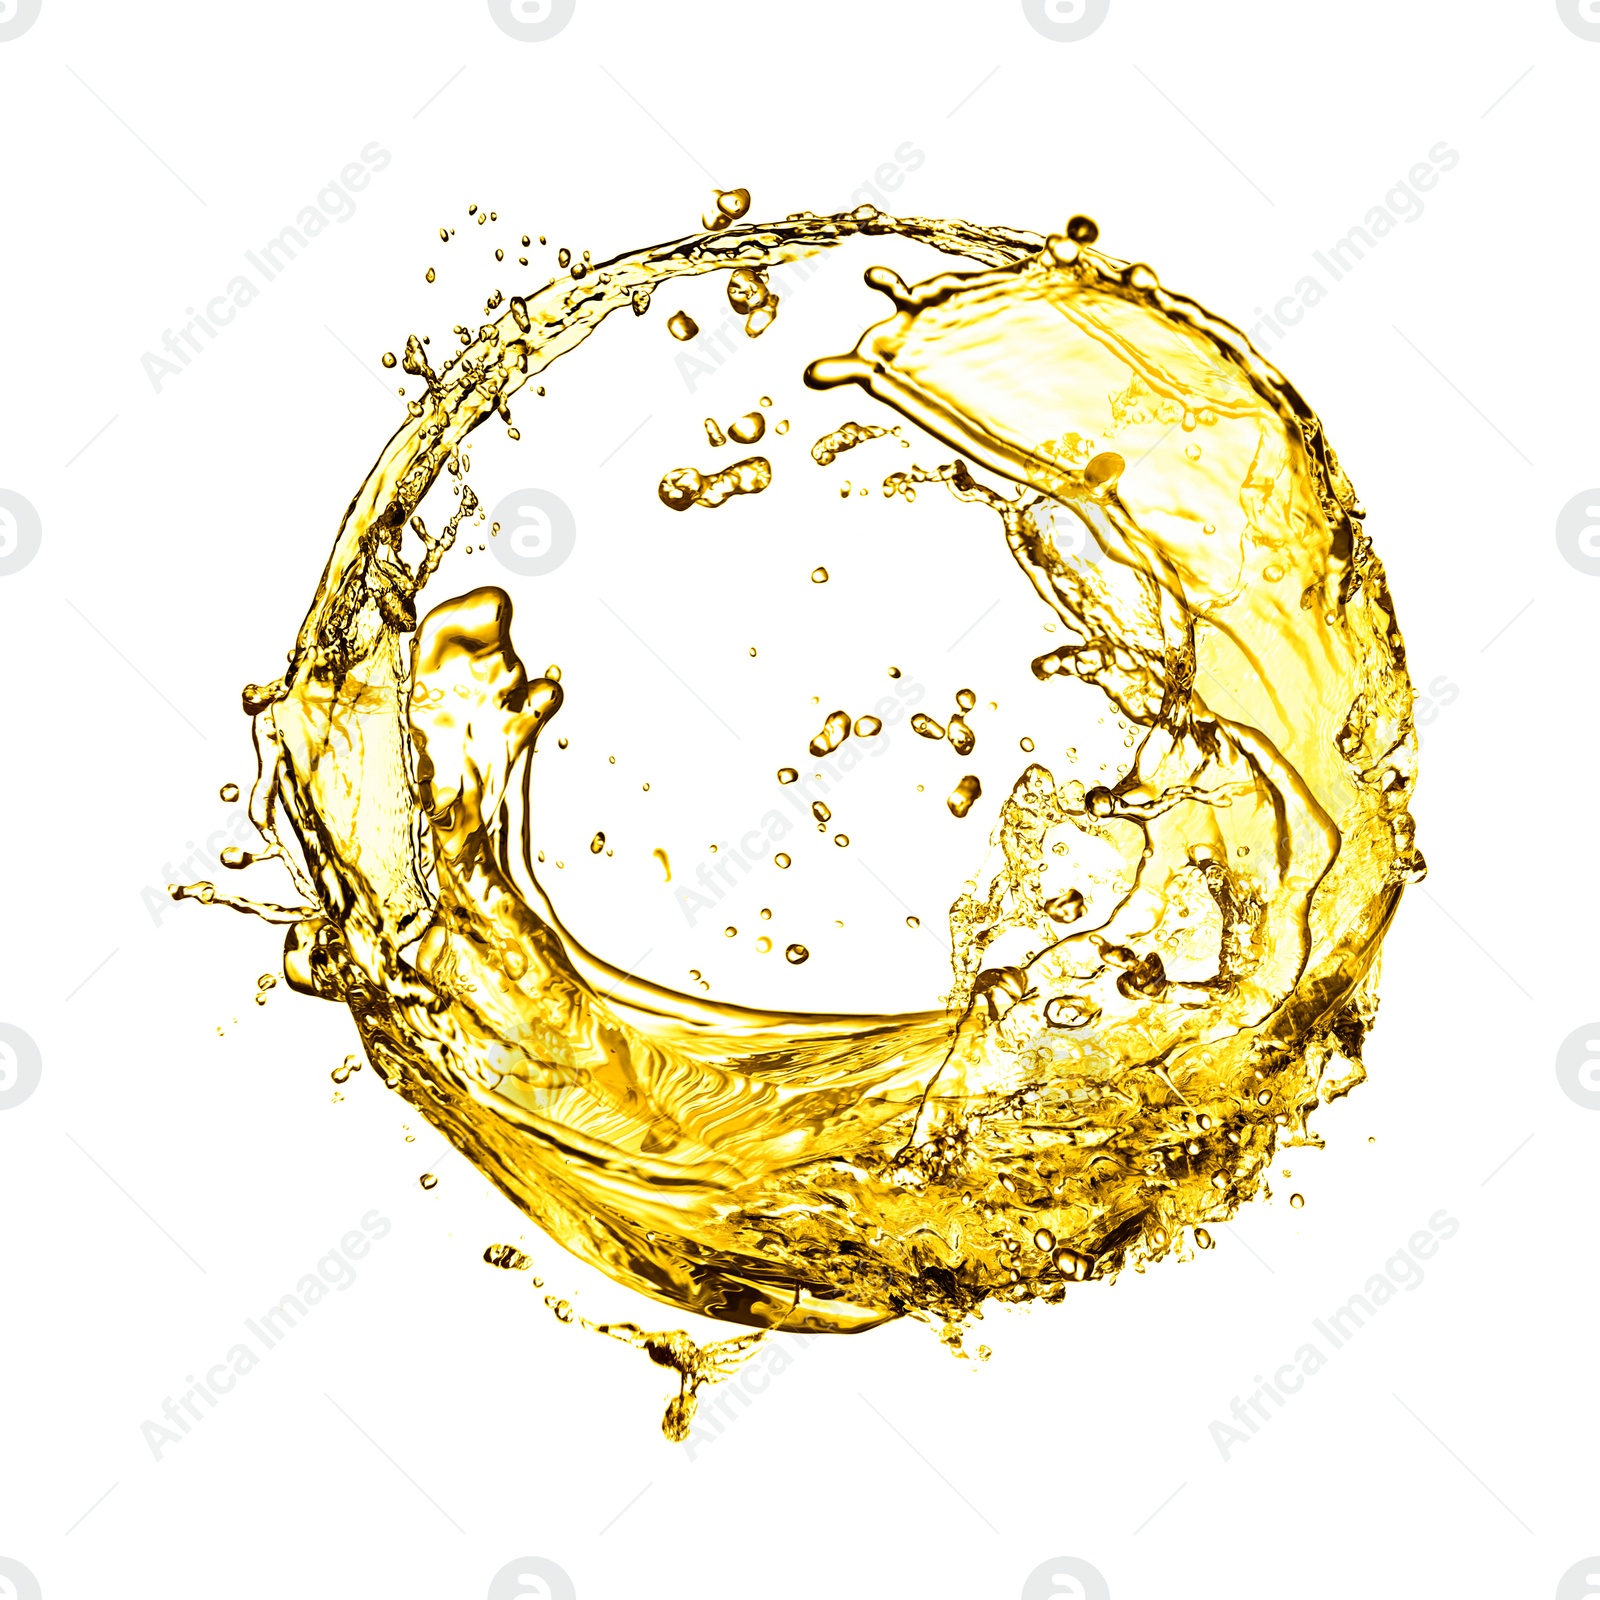 Image of Abstract splash of golden oily liquid on white background